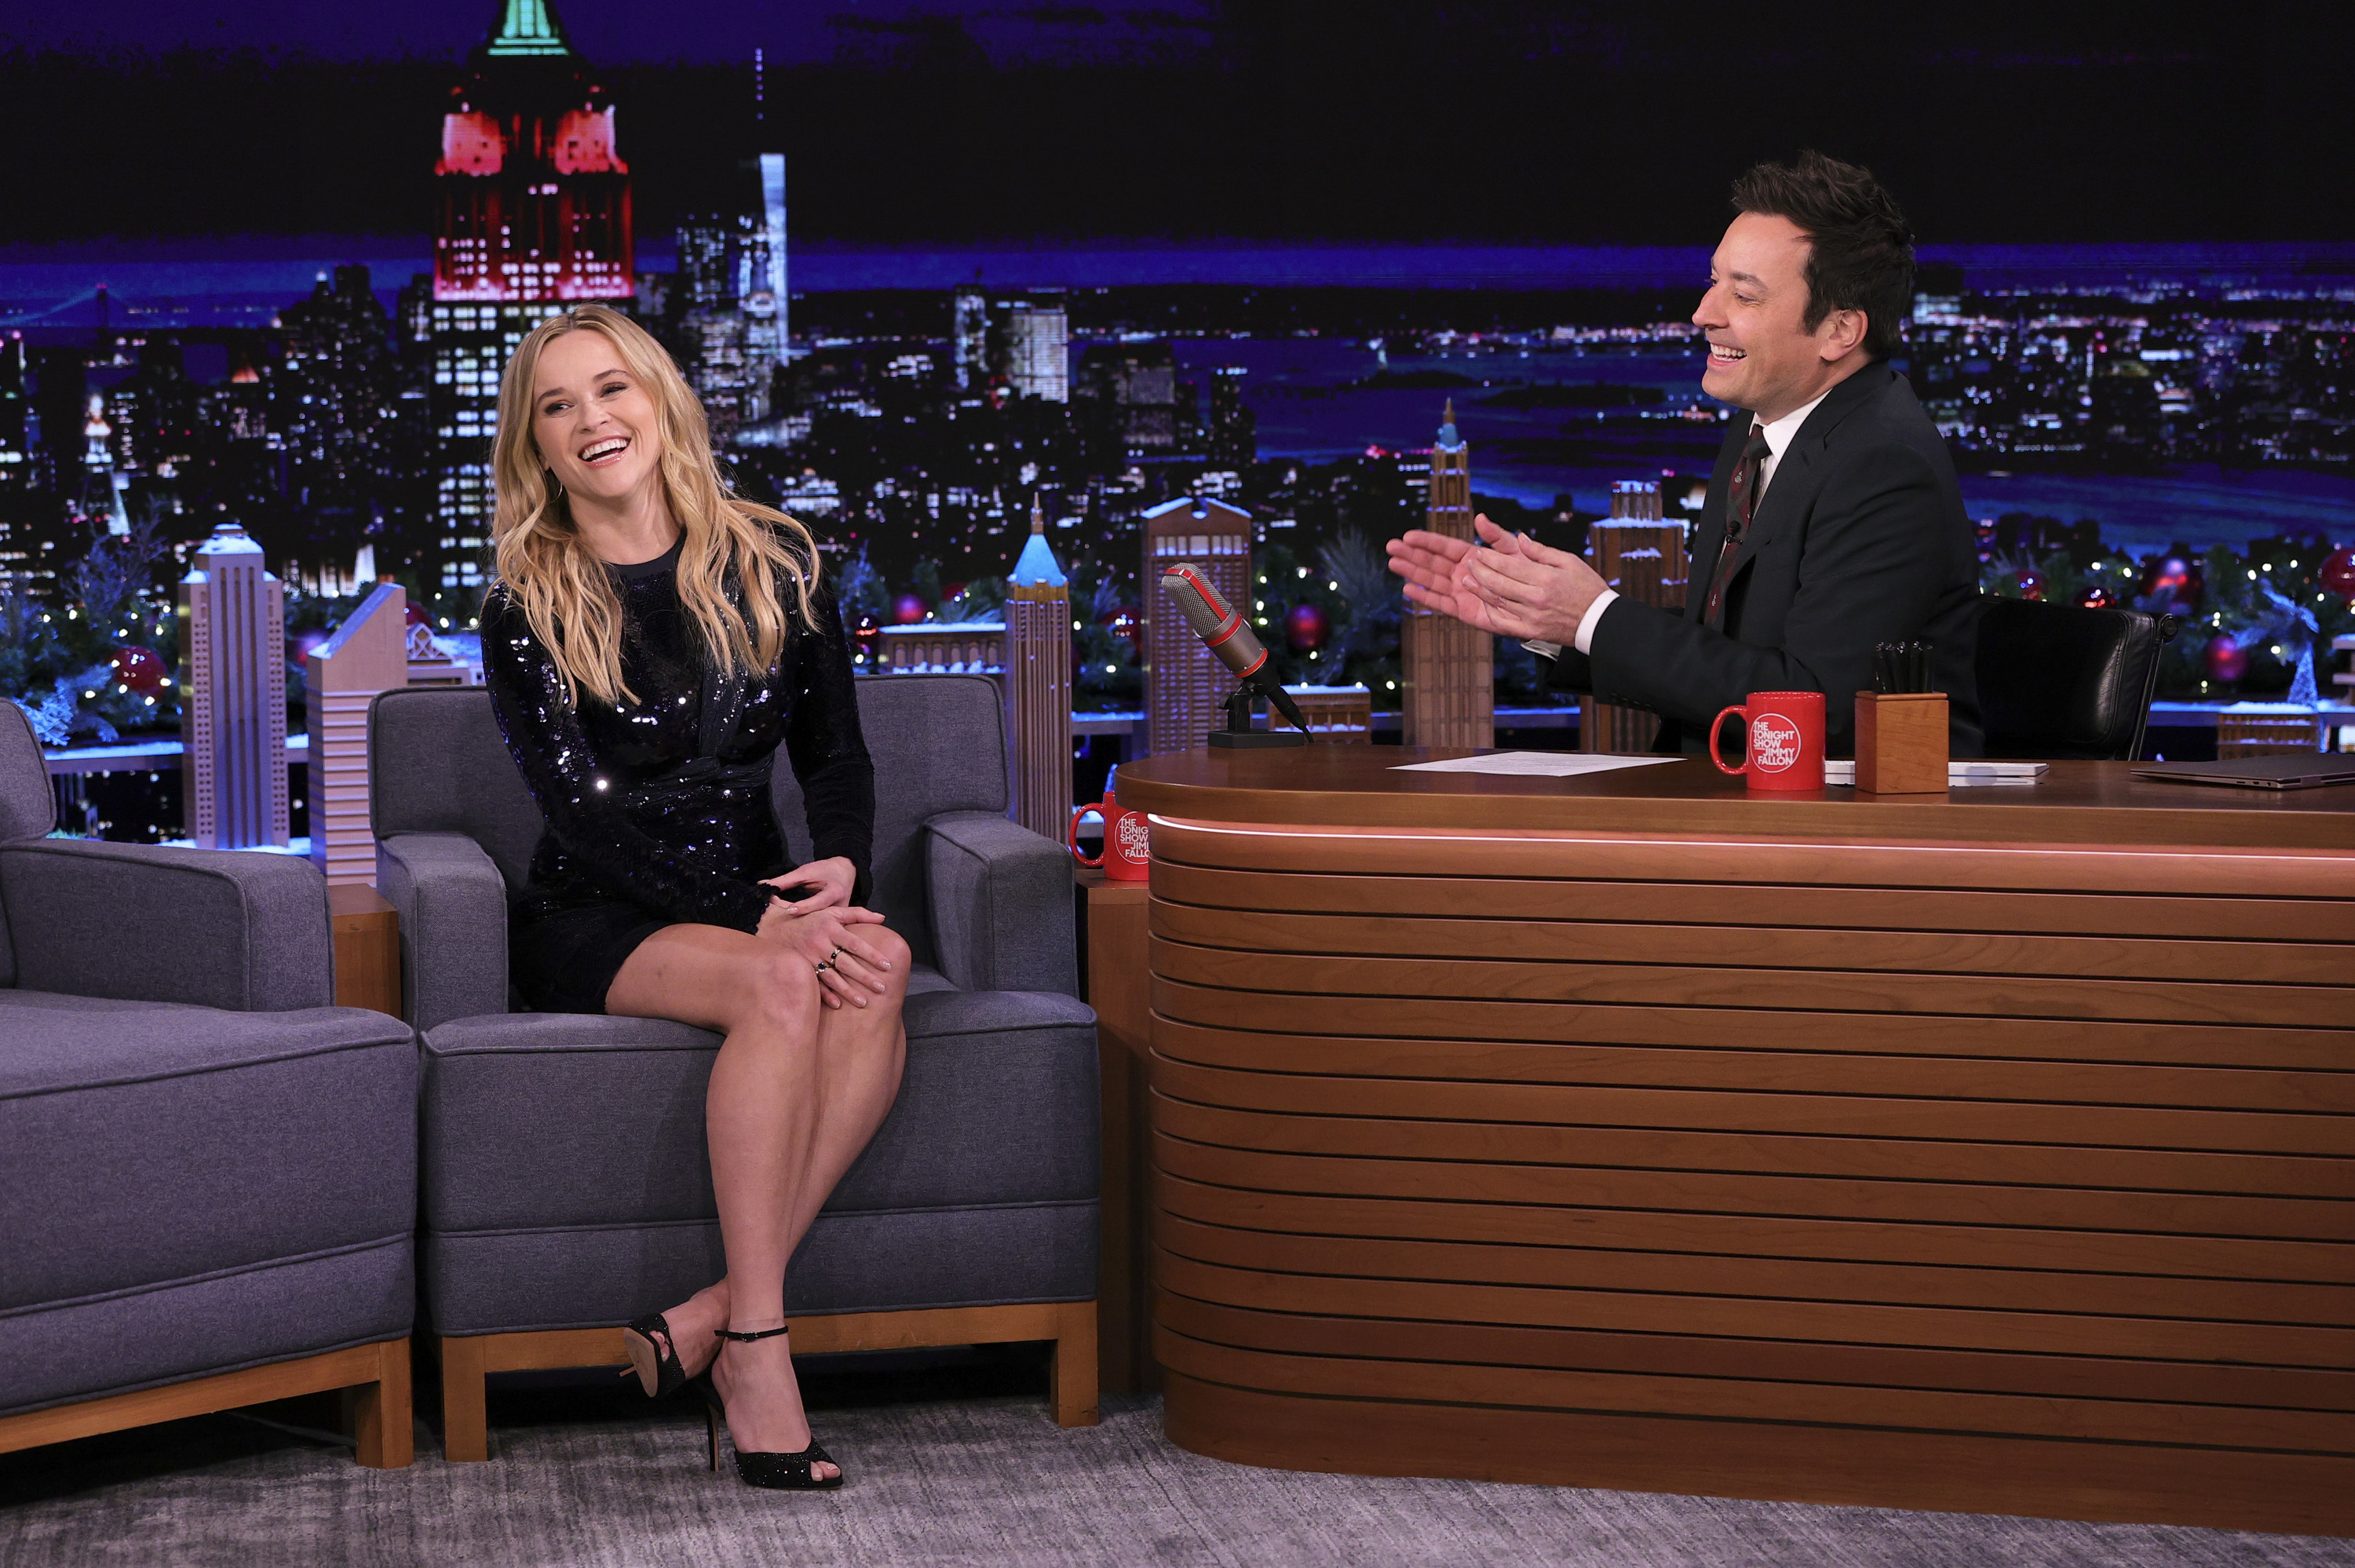 Reese Witherspoon on The Tonight Show Starring Jimmy Fallon